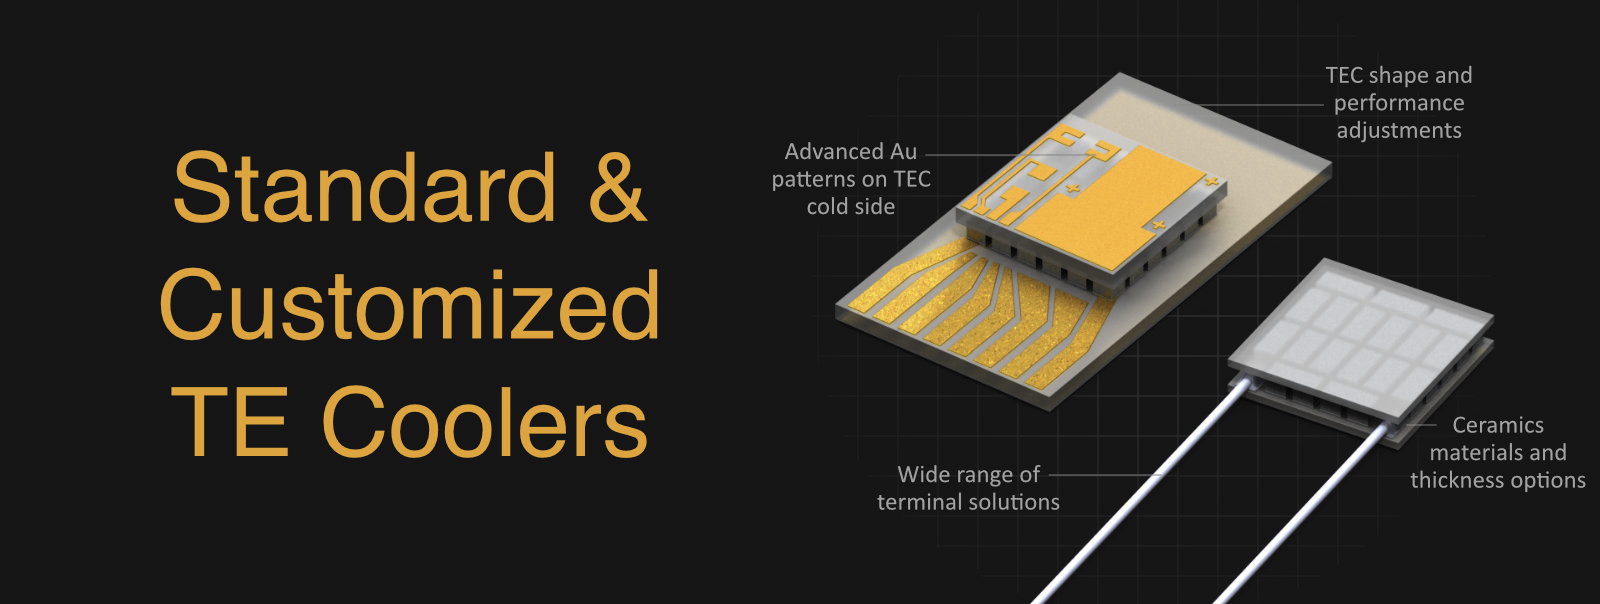 Advanced miniature thermoelectric coolers. More than 5000 different TEC types.